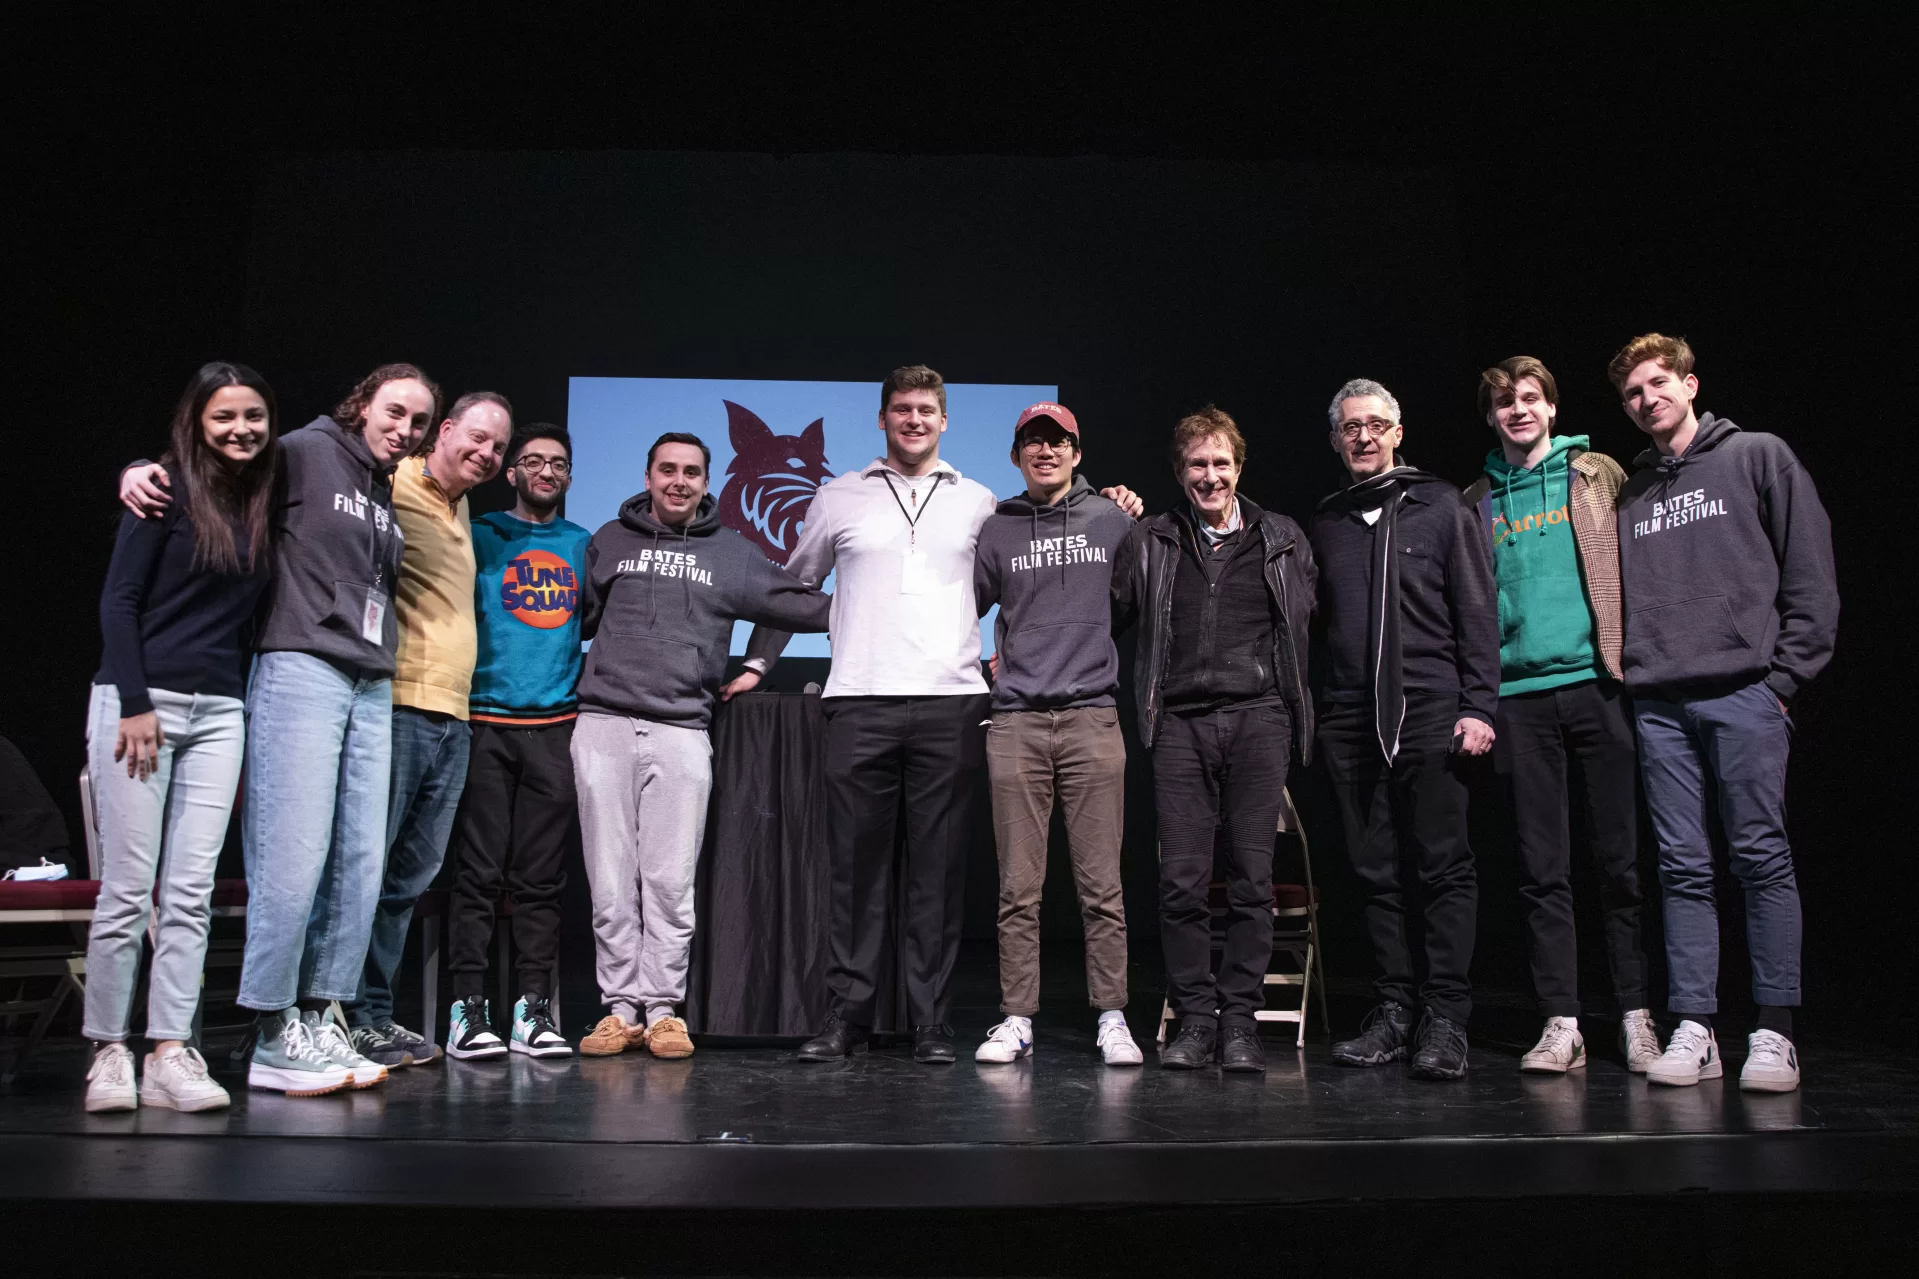 Bates Film Festival guests John Turturro and John Shea ’72 participate in two back to back Q&As in Schaeffer Theater. Turturro was from 2:30-4 p.m. Shea was from 4:30 to 6 p.m. Faculty members Jon Cavallero, Katalin Vecsey and Tim Dugan joined students from the Cavallero’s festival class to pose questions to the two actor/director/writers.